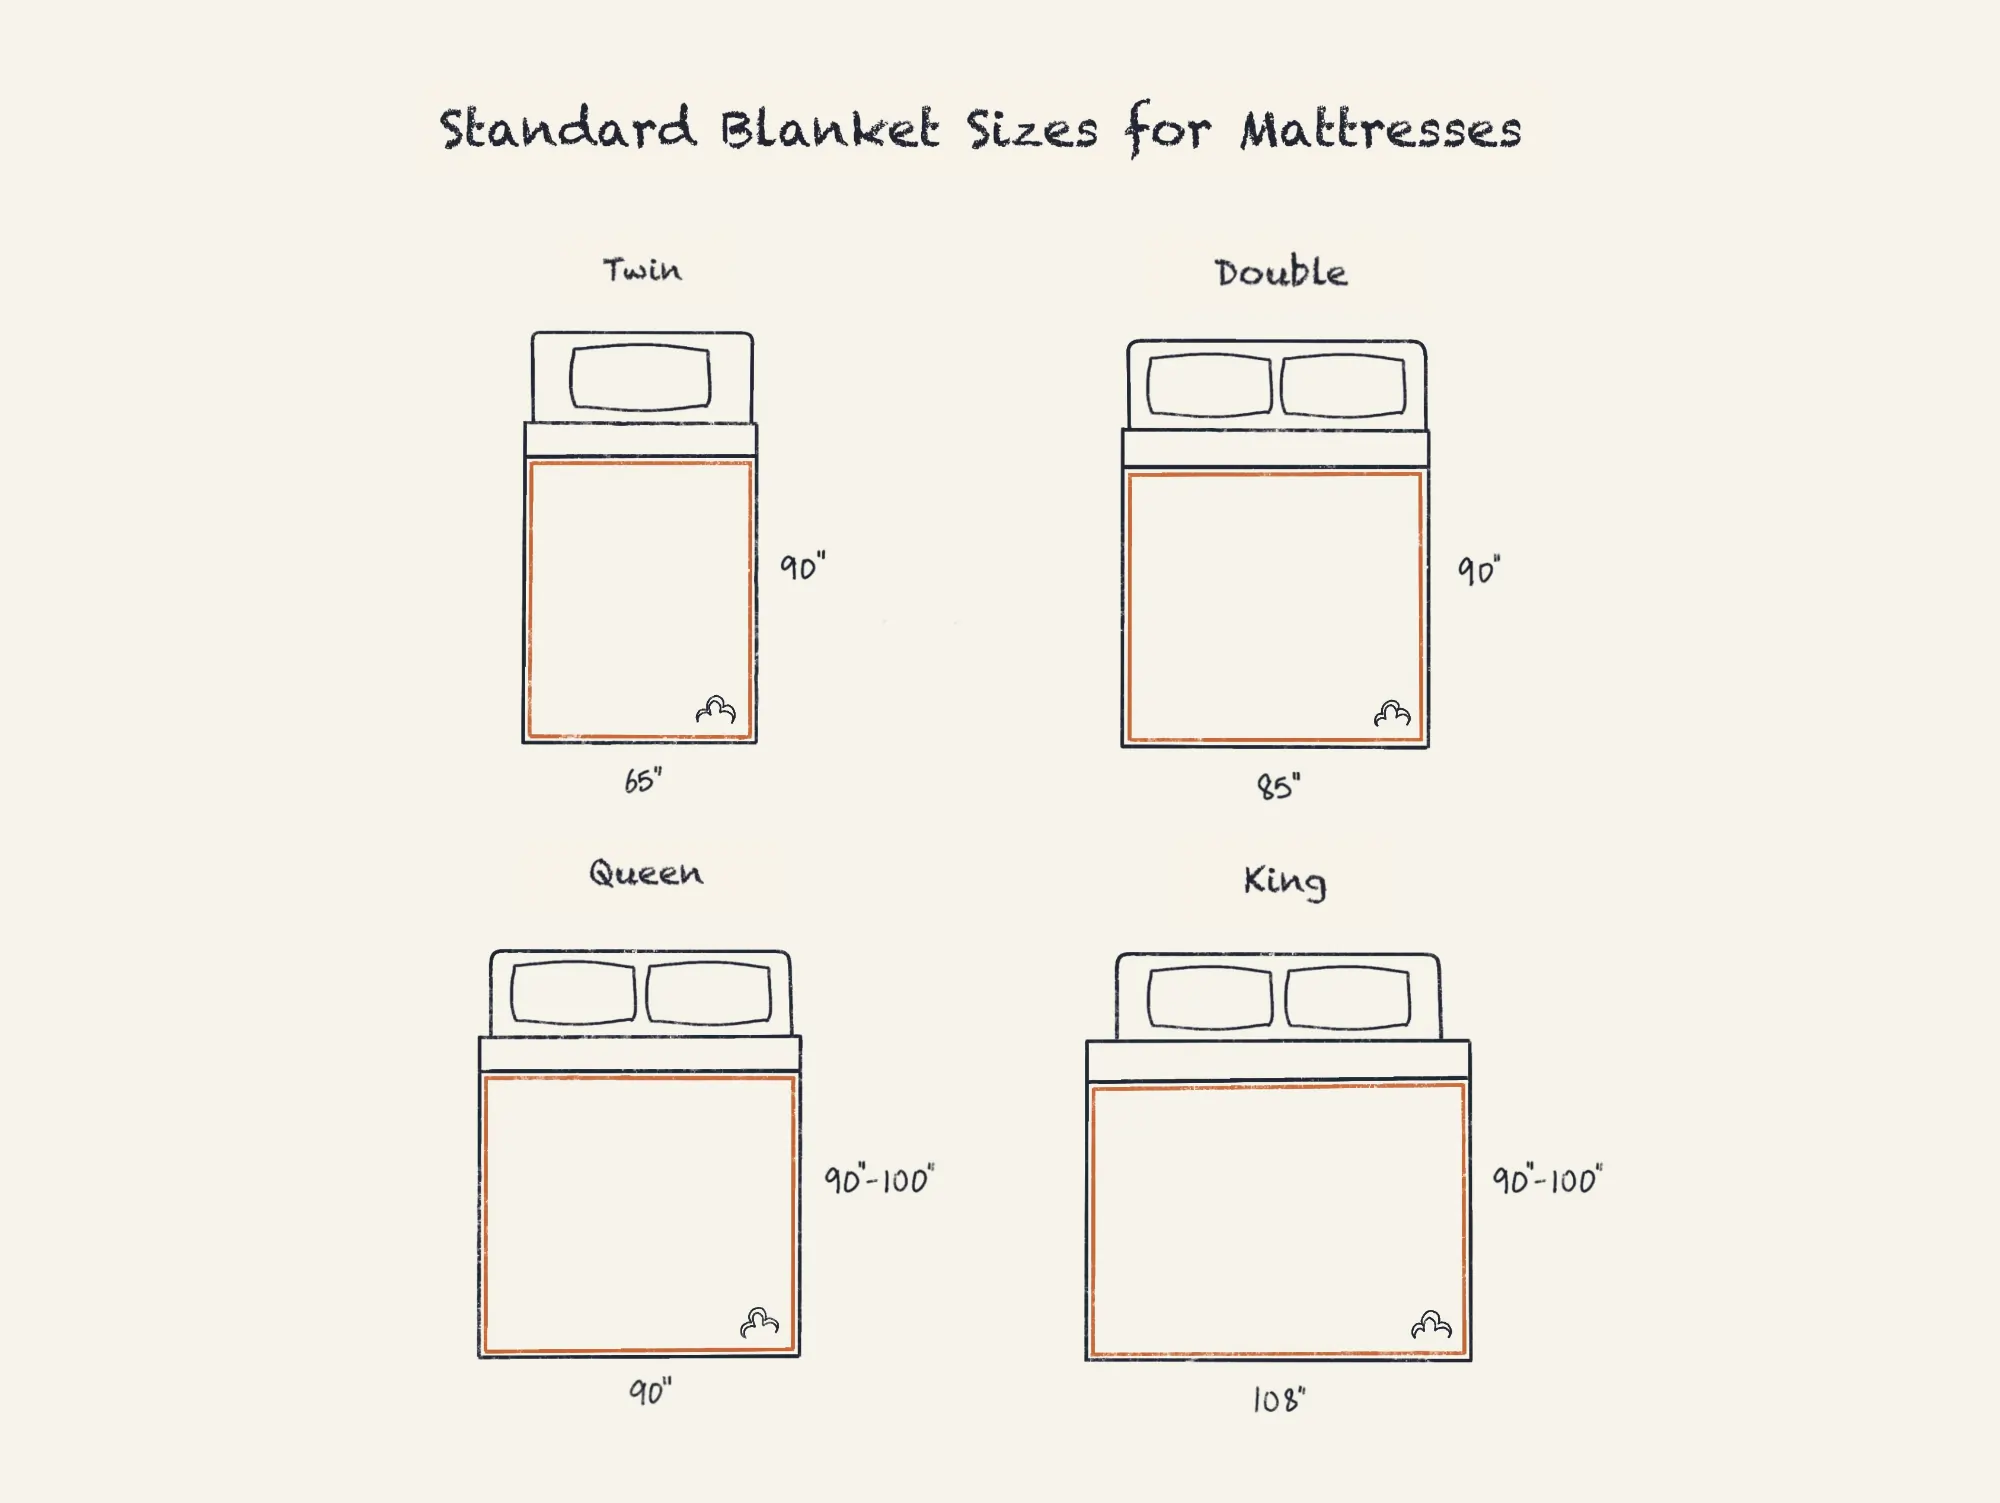 Throw Blanket Size Guide & Chart